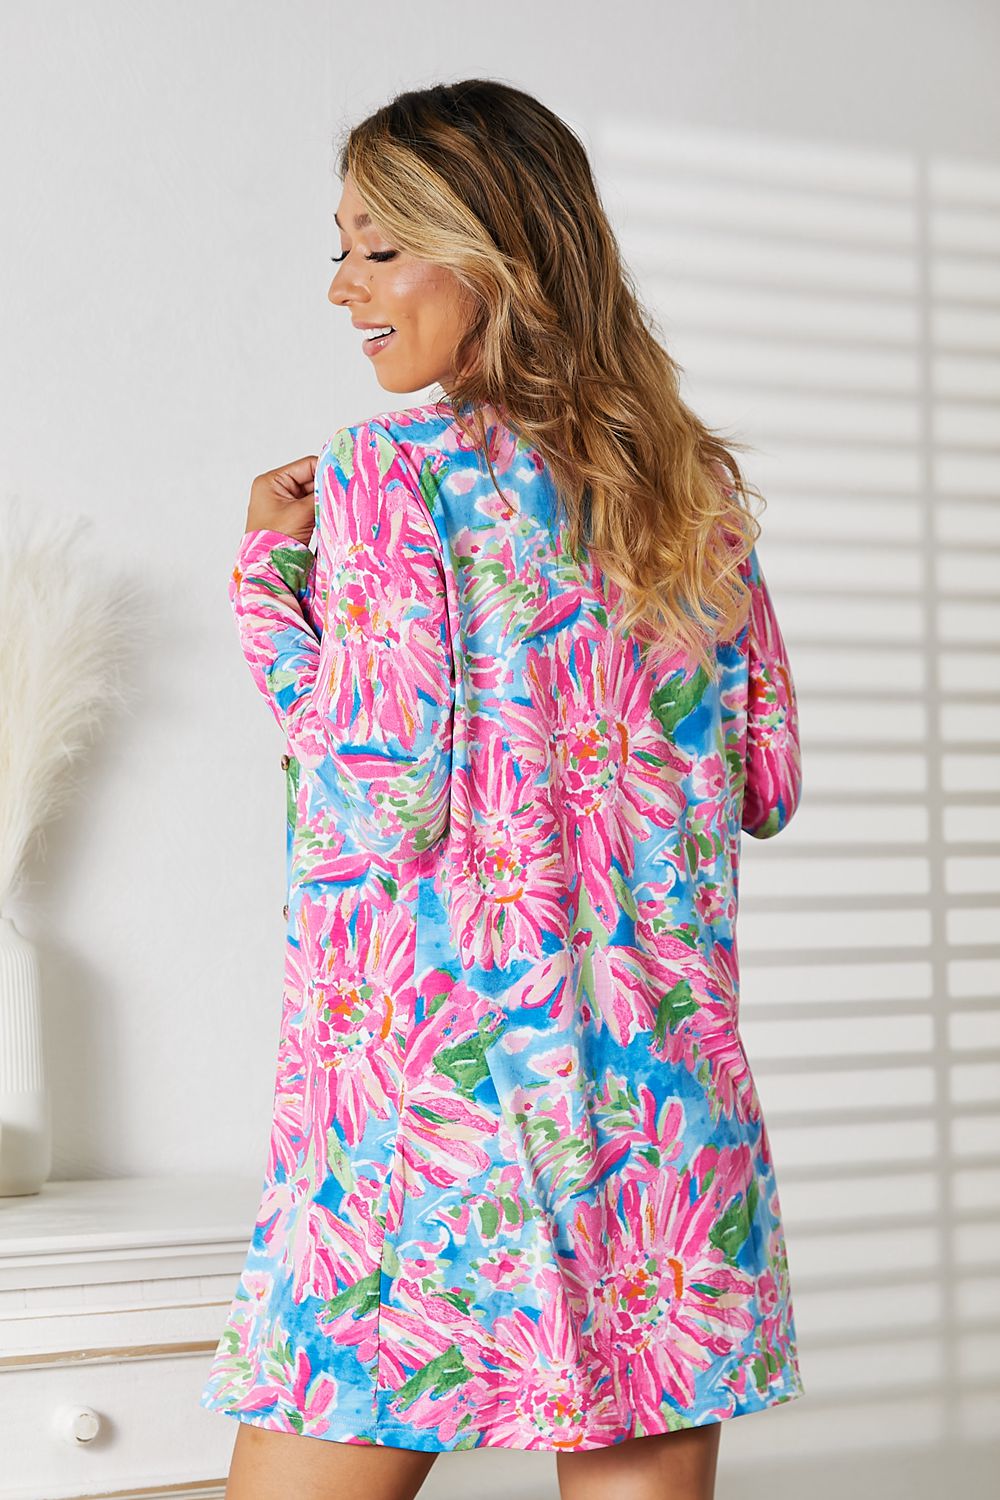 Double Take Floral Open Front Long Sleeve Cardigan - nailedmoms